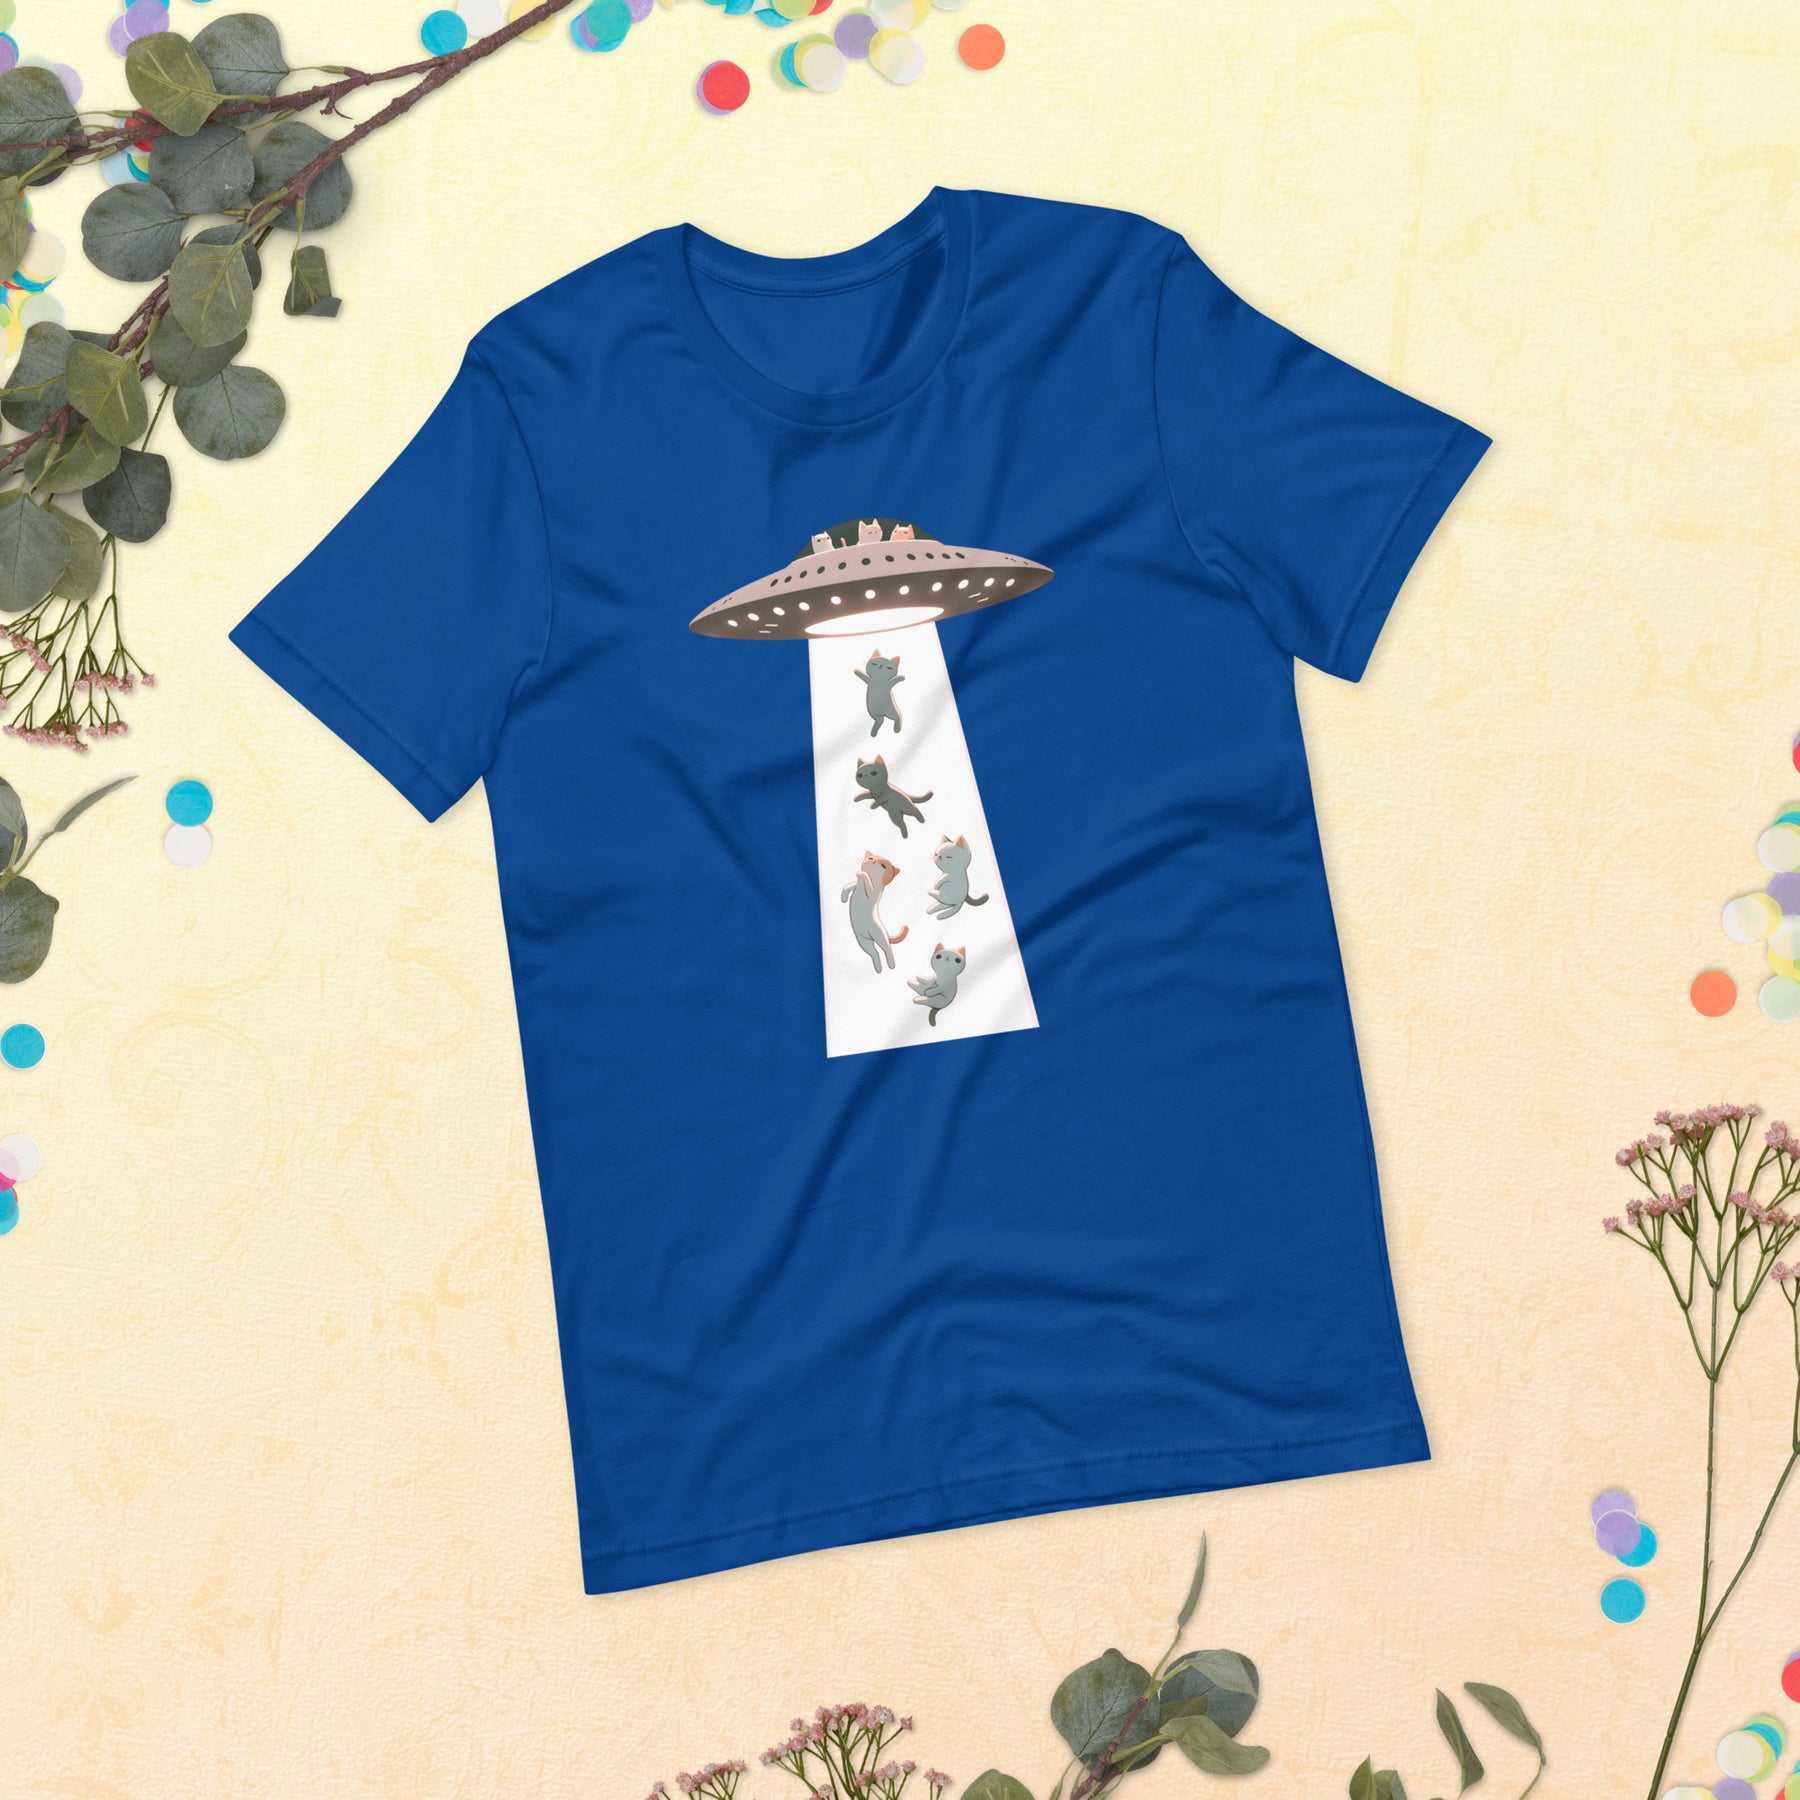 Funny UFO Cat Abduction Tee - Kawaii Cats Alien Spaceship Design for Science and Cat Enthusiasts